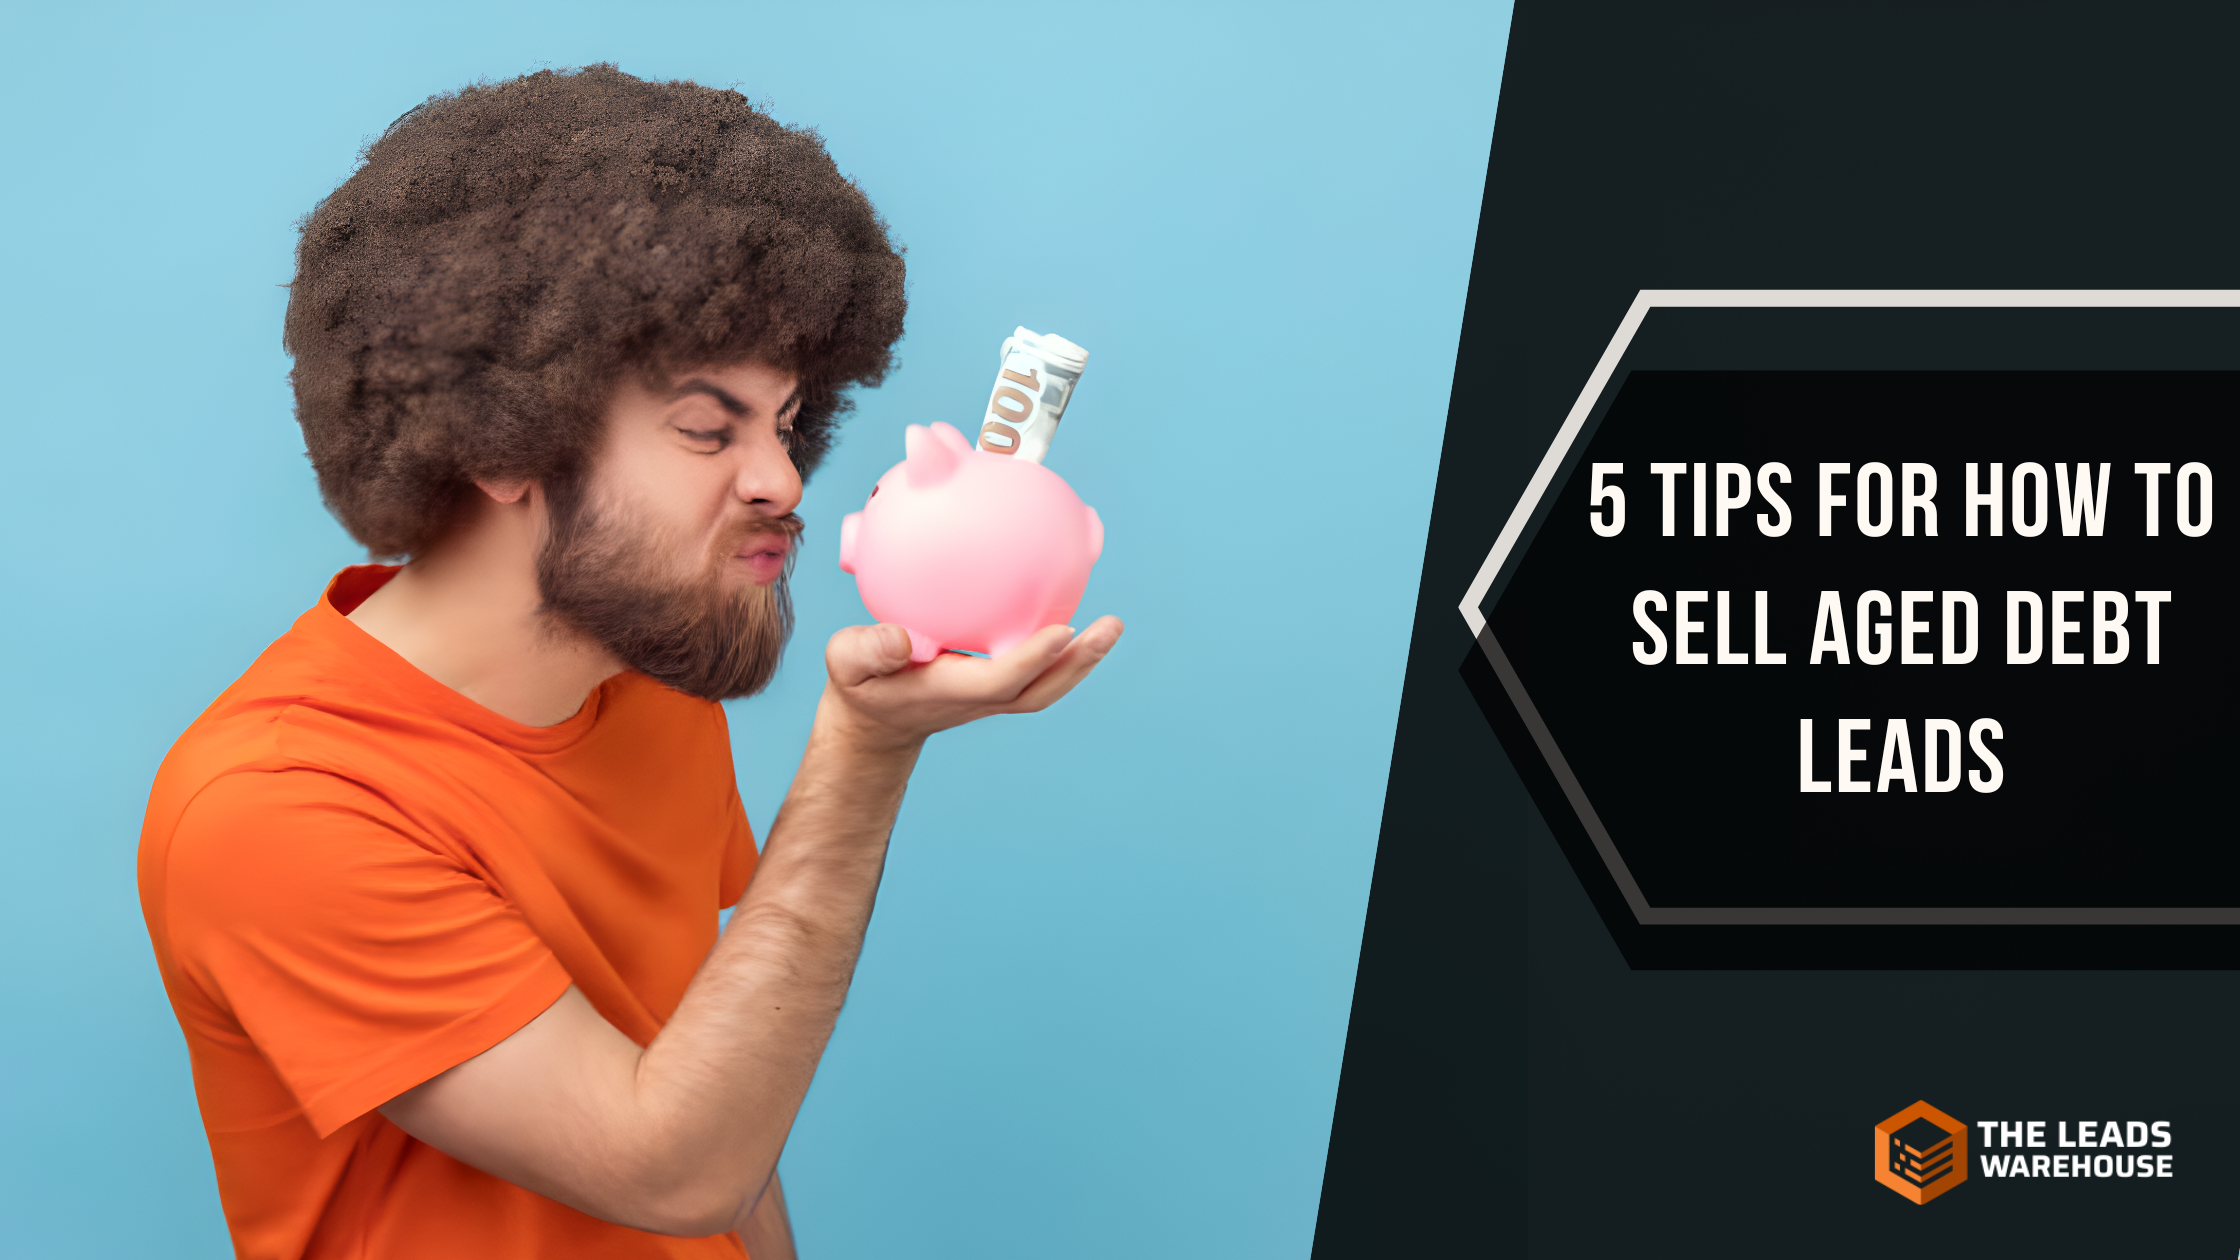 Sell Aged Debt Leads | 5 Tips